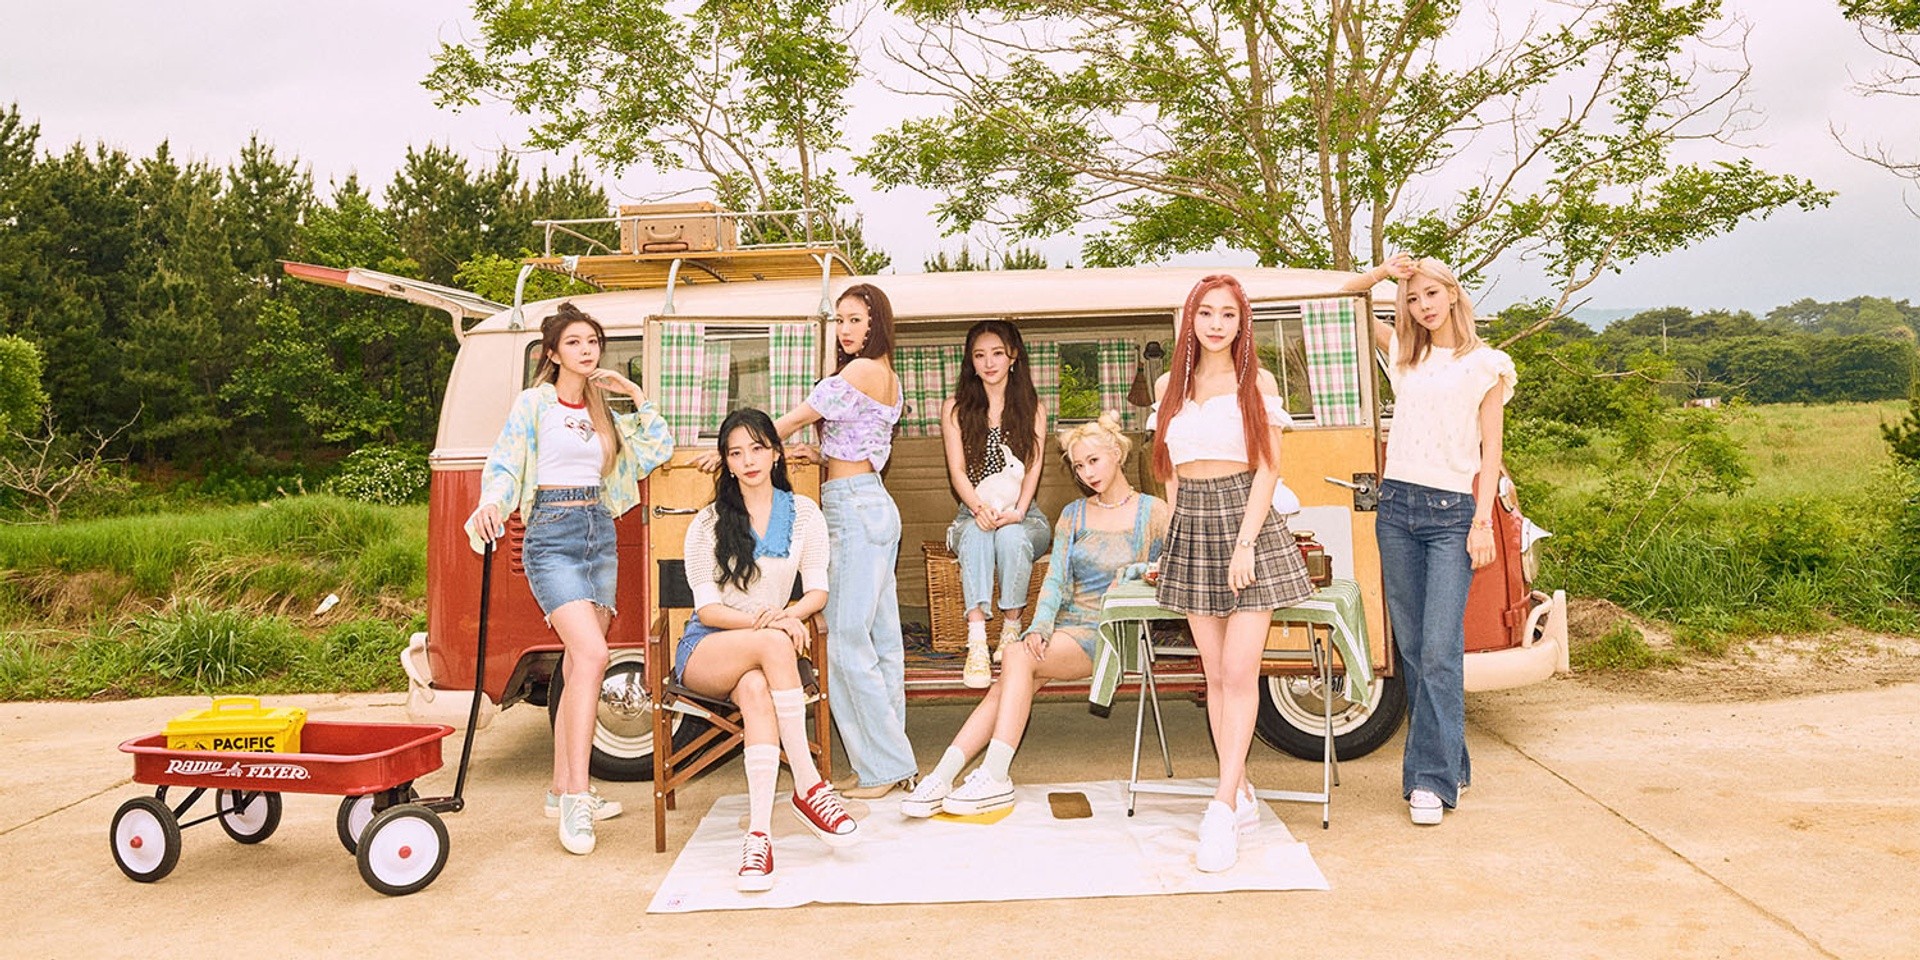 Dreamcatcher talk about the concept of their latest album '[Summer Holiday]'